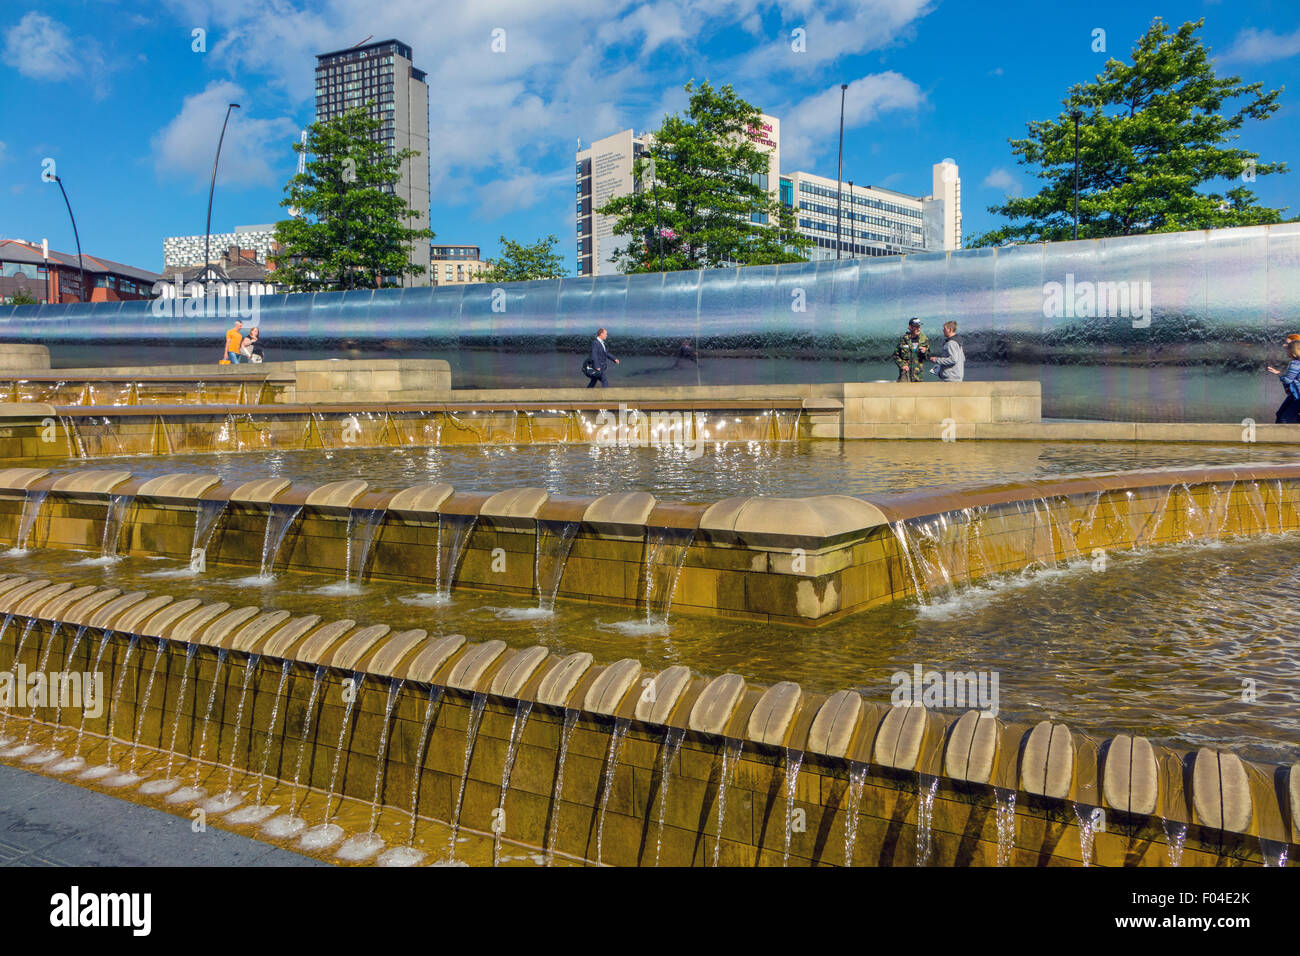 Water features and fountains, Sheffield railway station, South Yorkshire Stock Photo